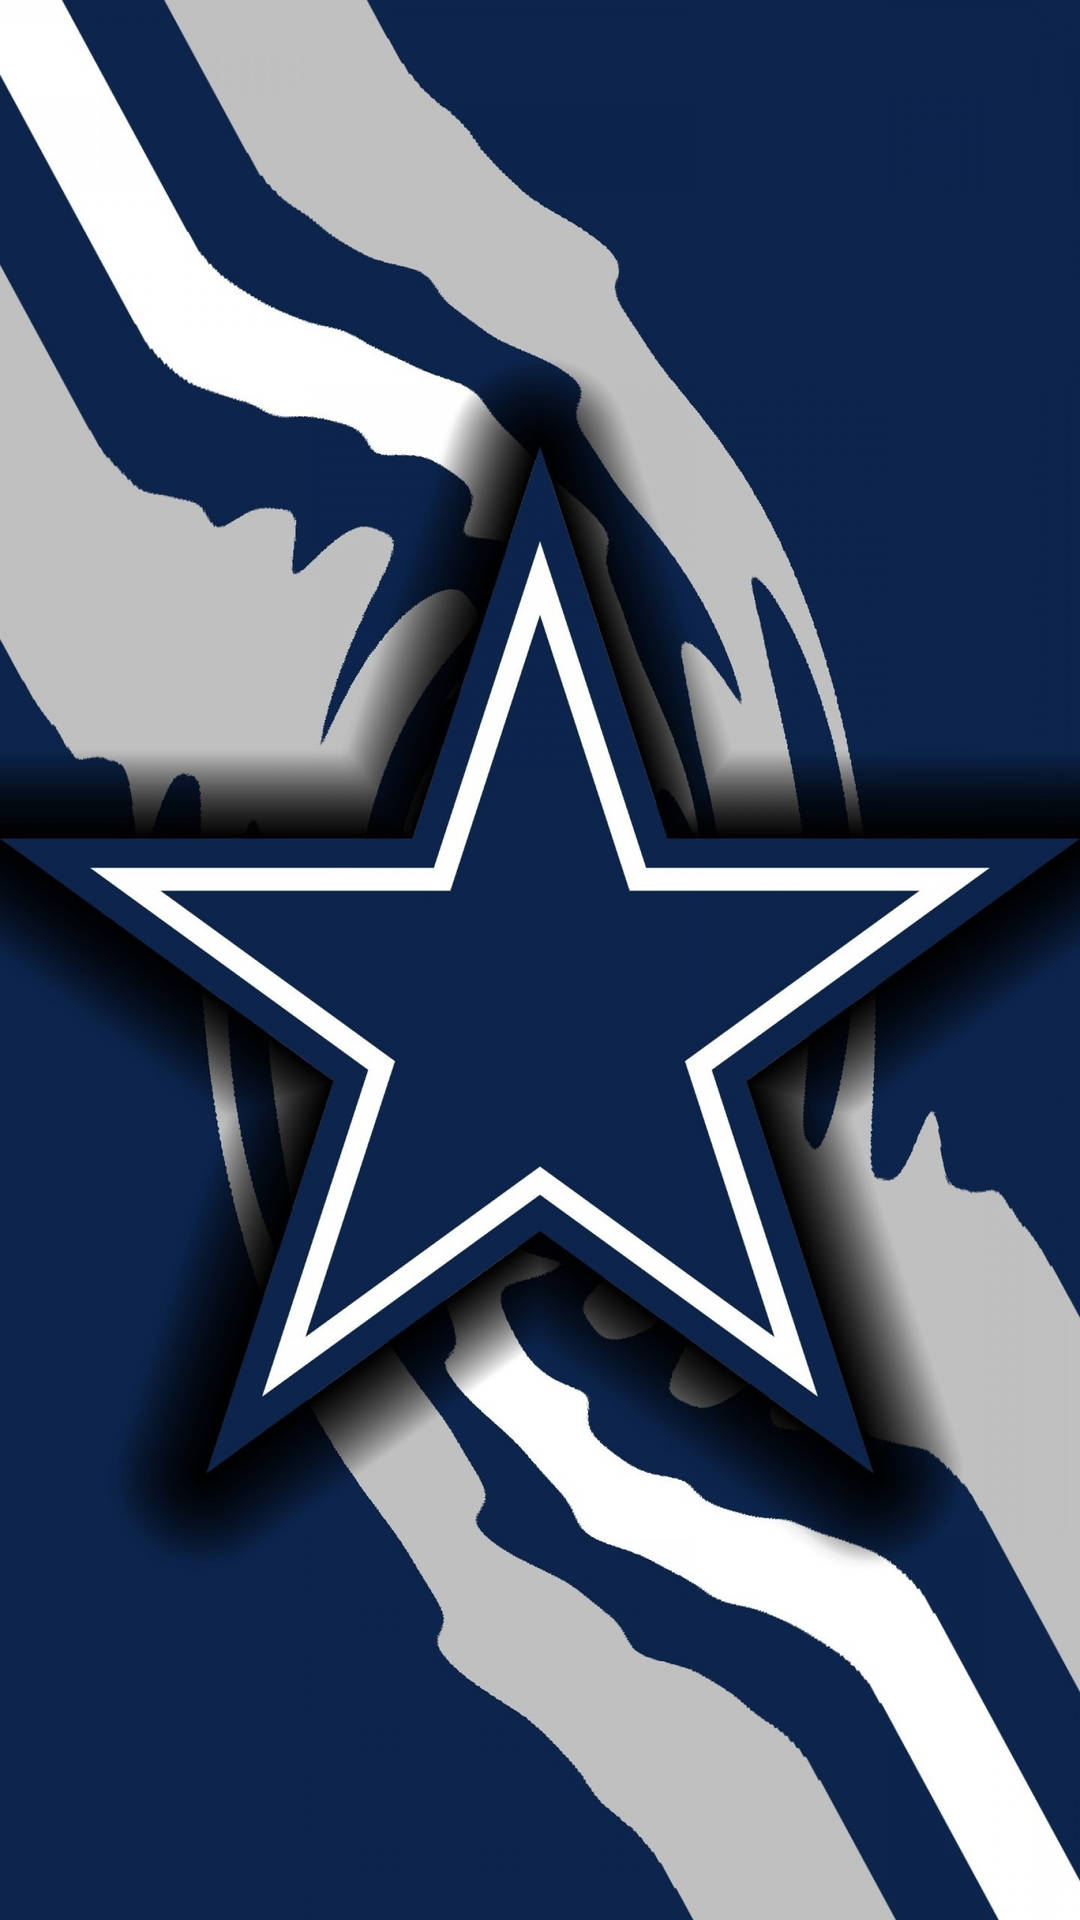 Dallas Cowboys Logo With Swirls For Phone Wallpaper